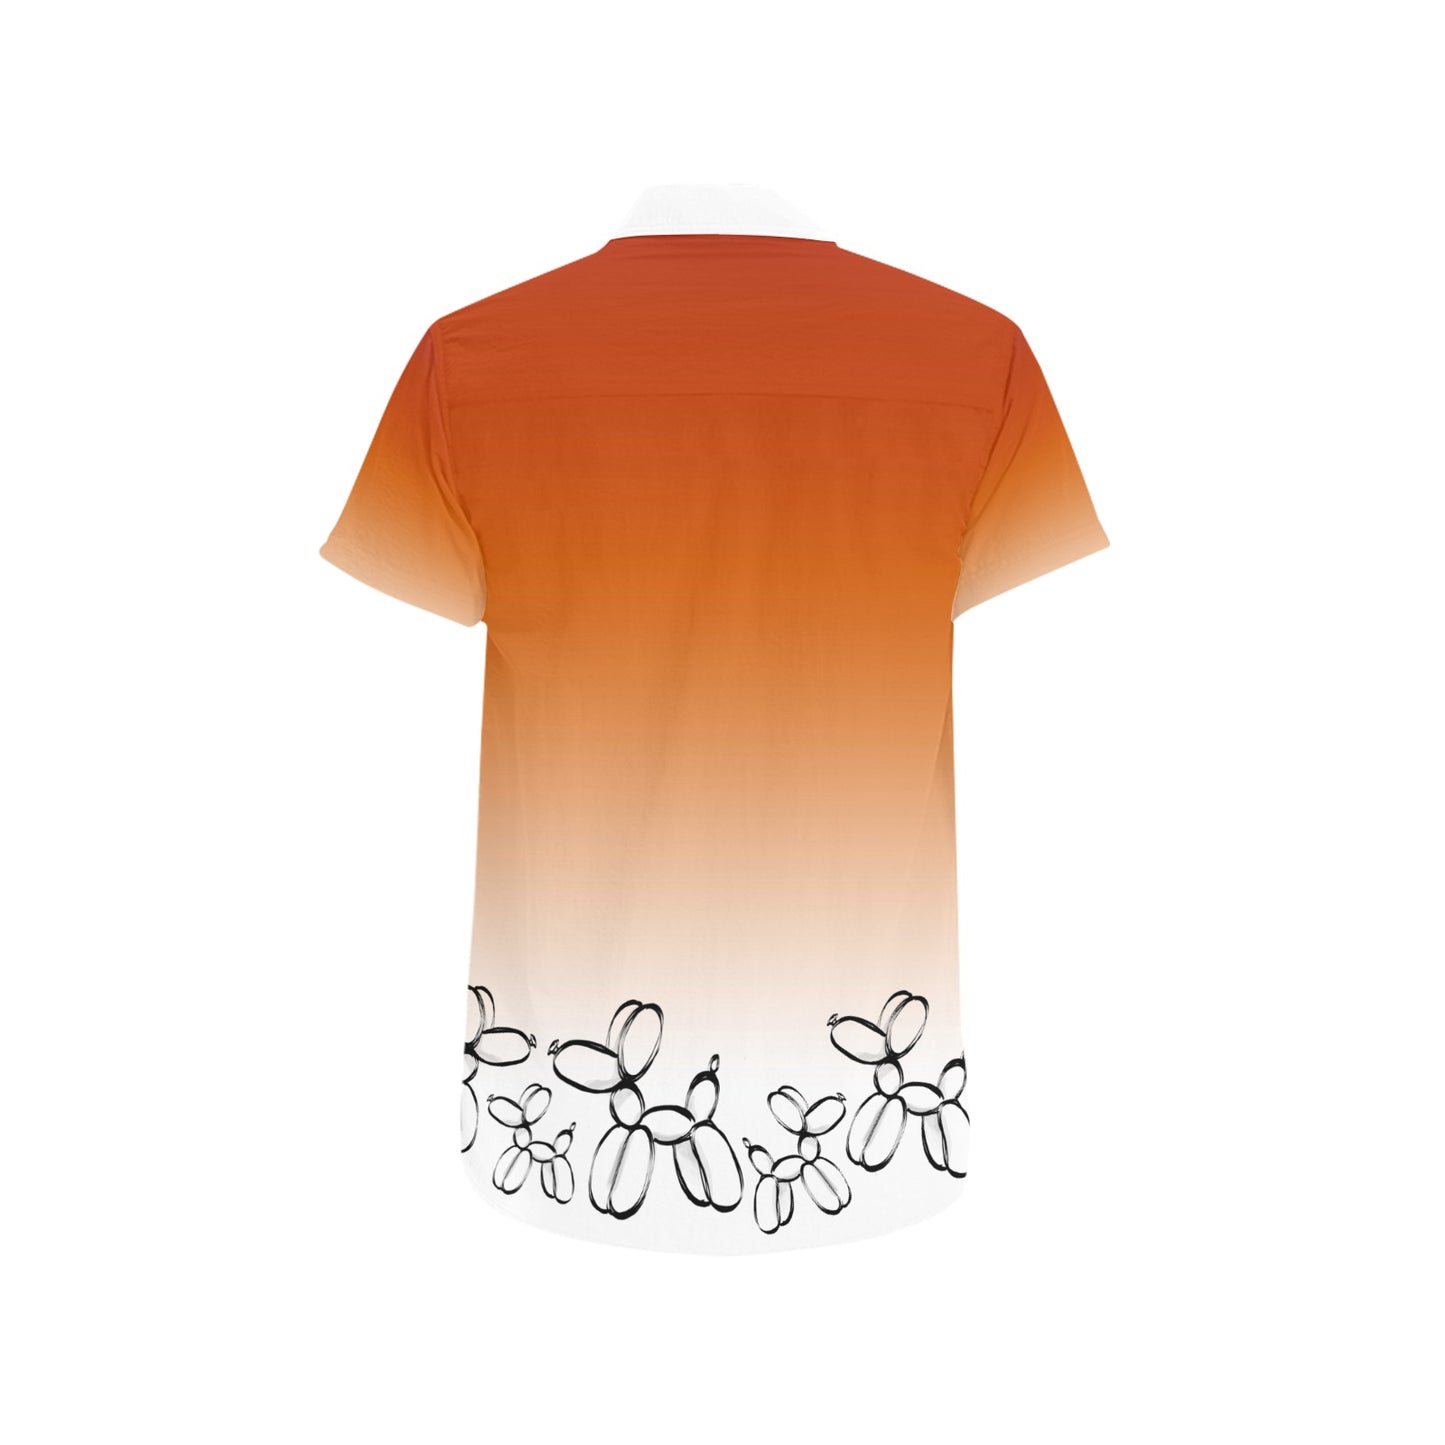 Professional Balloon Twisting shirt in burnt orange with balloon dogs